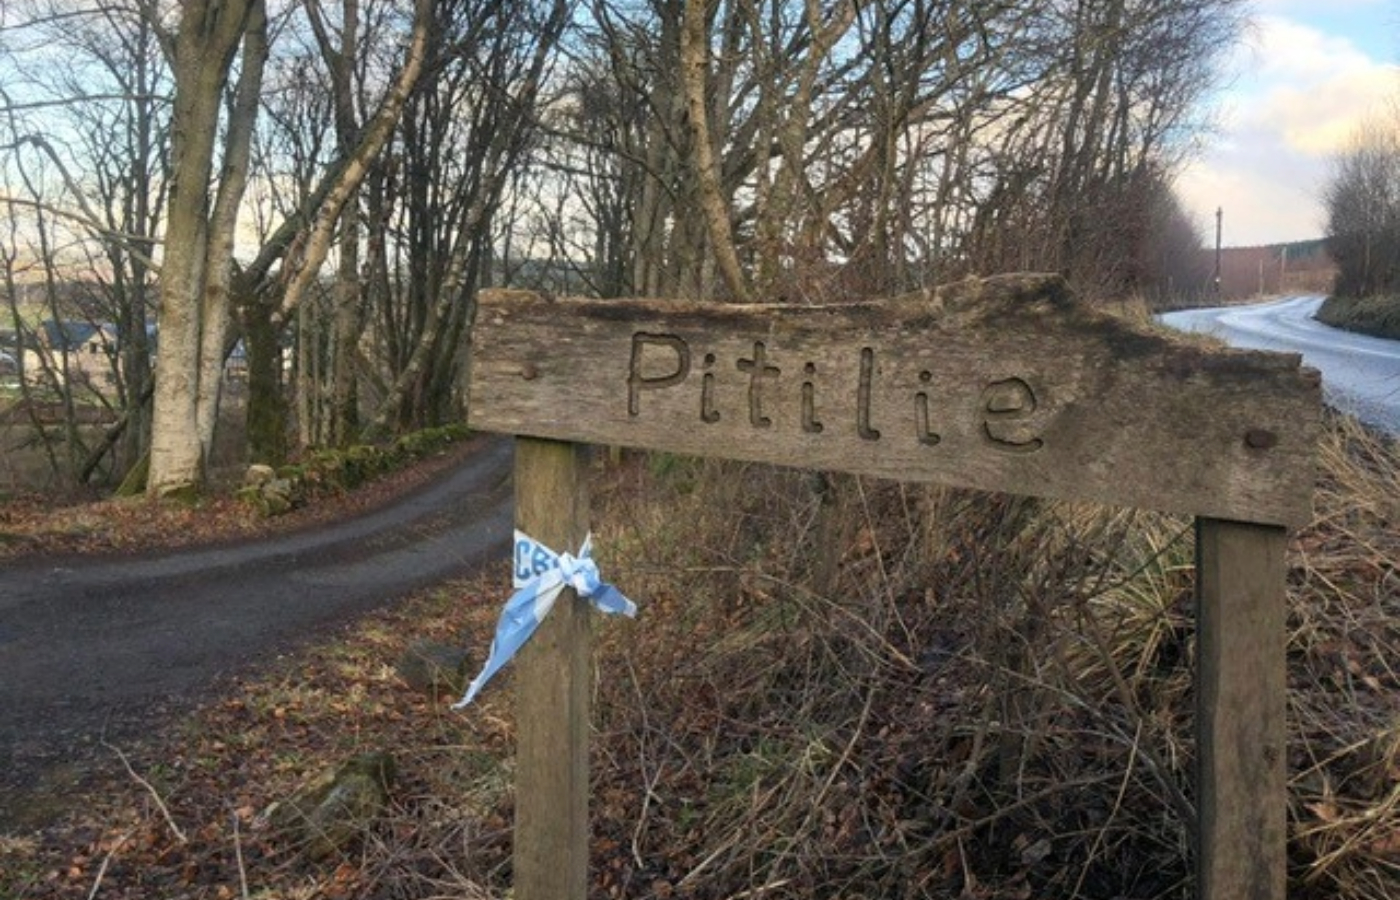 Brian Low was walking his black Labrador in the Pitilie area, on the outskirts of the town, around 8.30am on February 17 when he was shot dead.